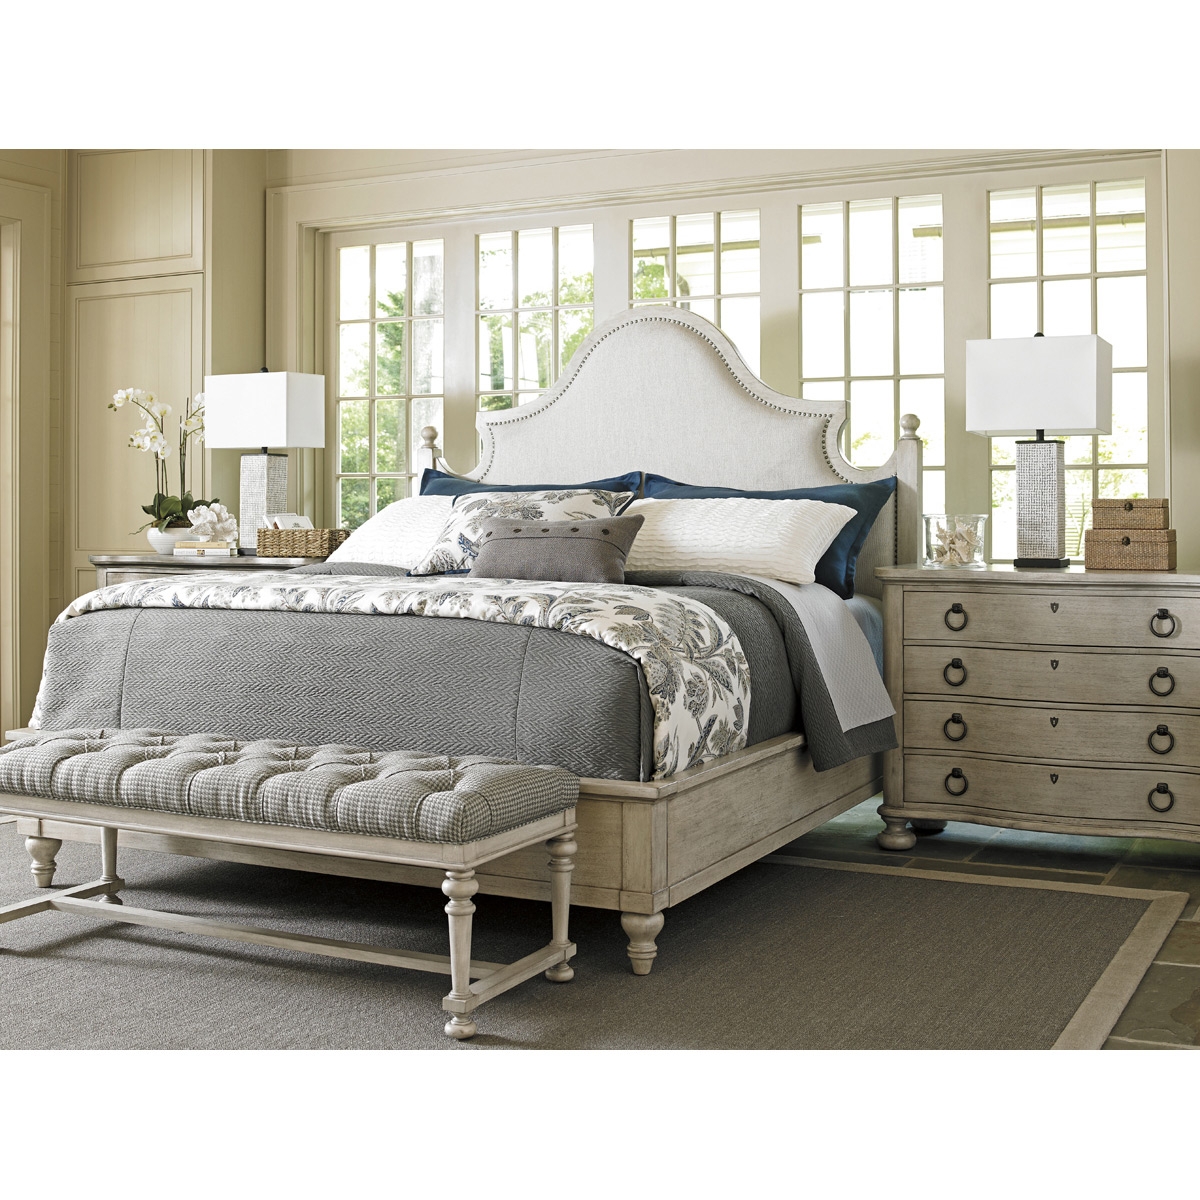 Lexington Arbor Hills French Country Grey Upholstered White Oyster Bed - King - Image 3